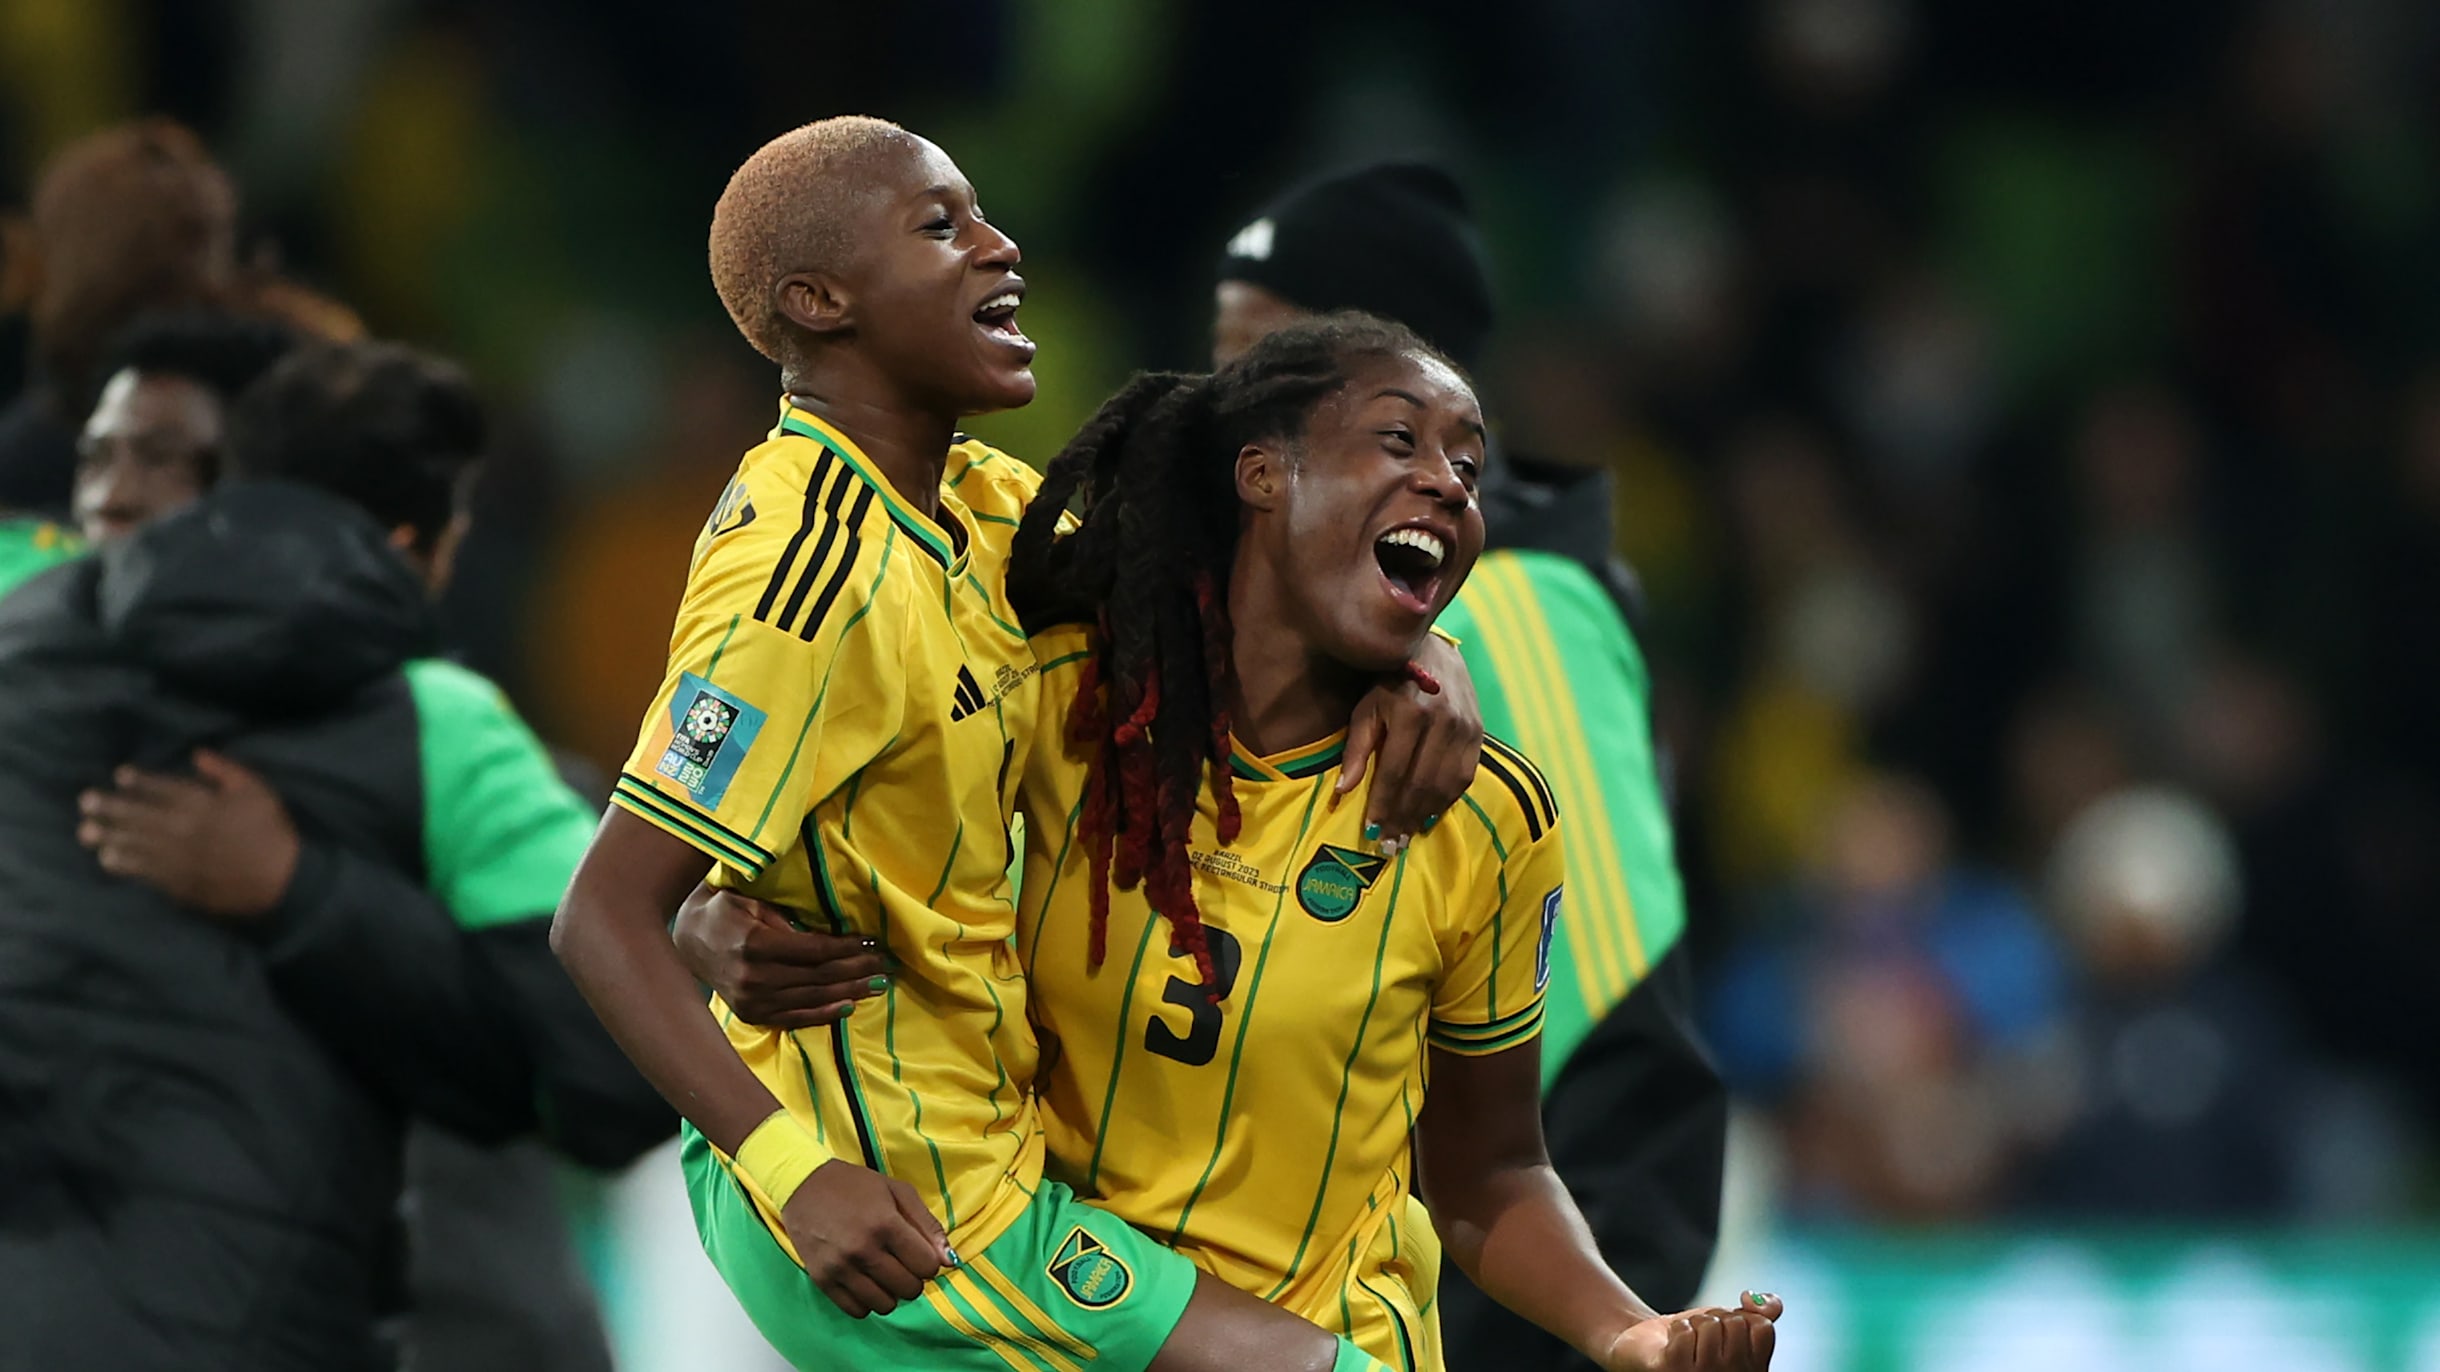 Women's World Cup: Jamaica makes history, France edges Brazil and Sweden  romps – Orange County Register